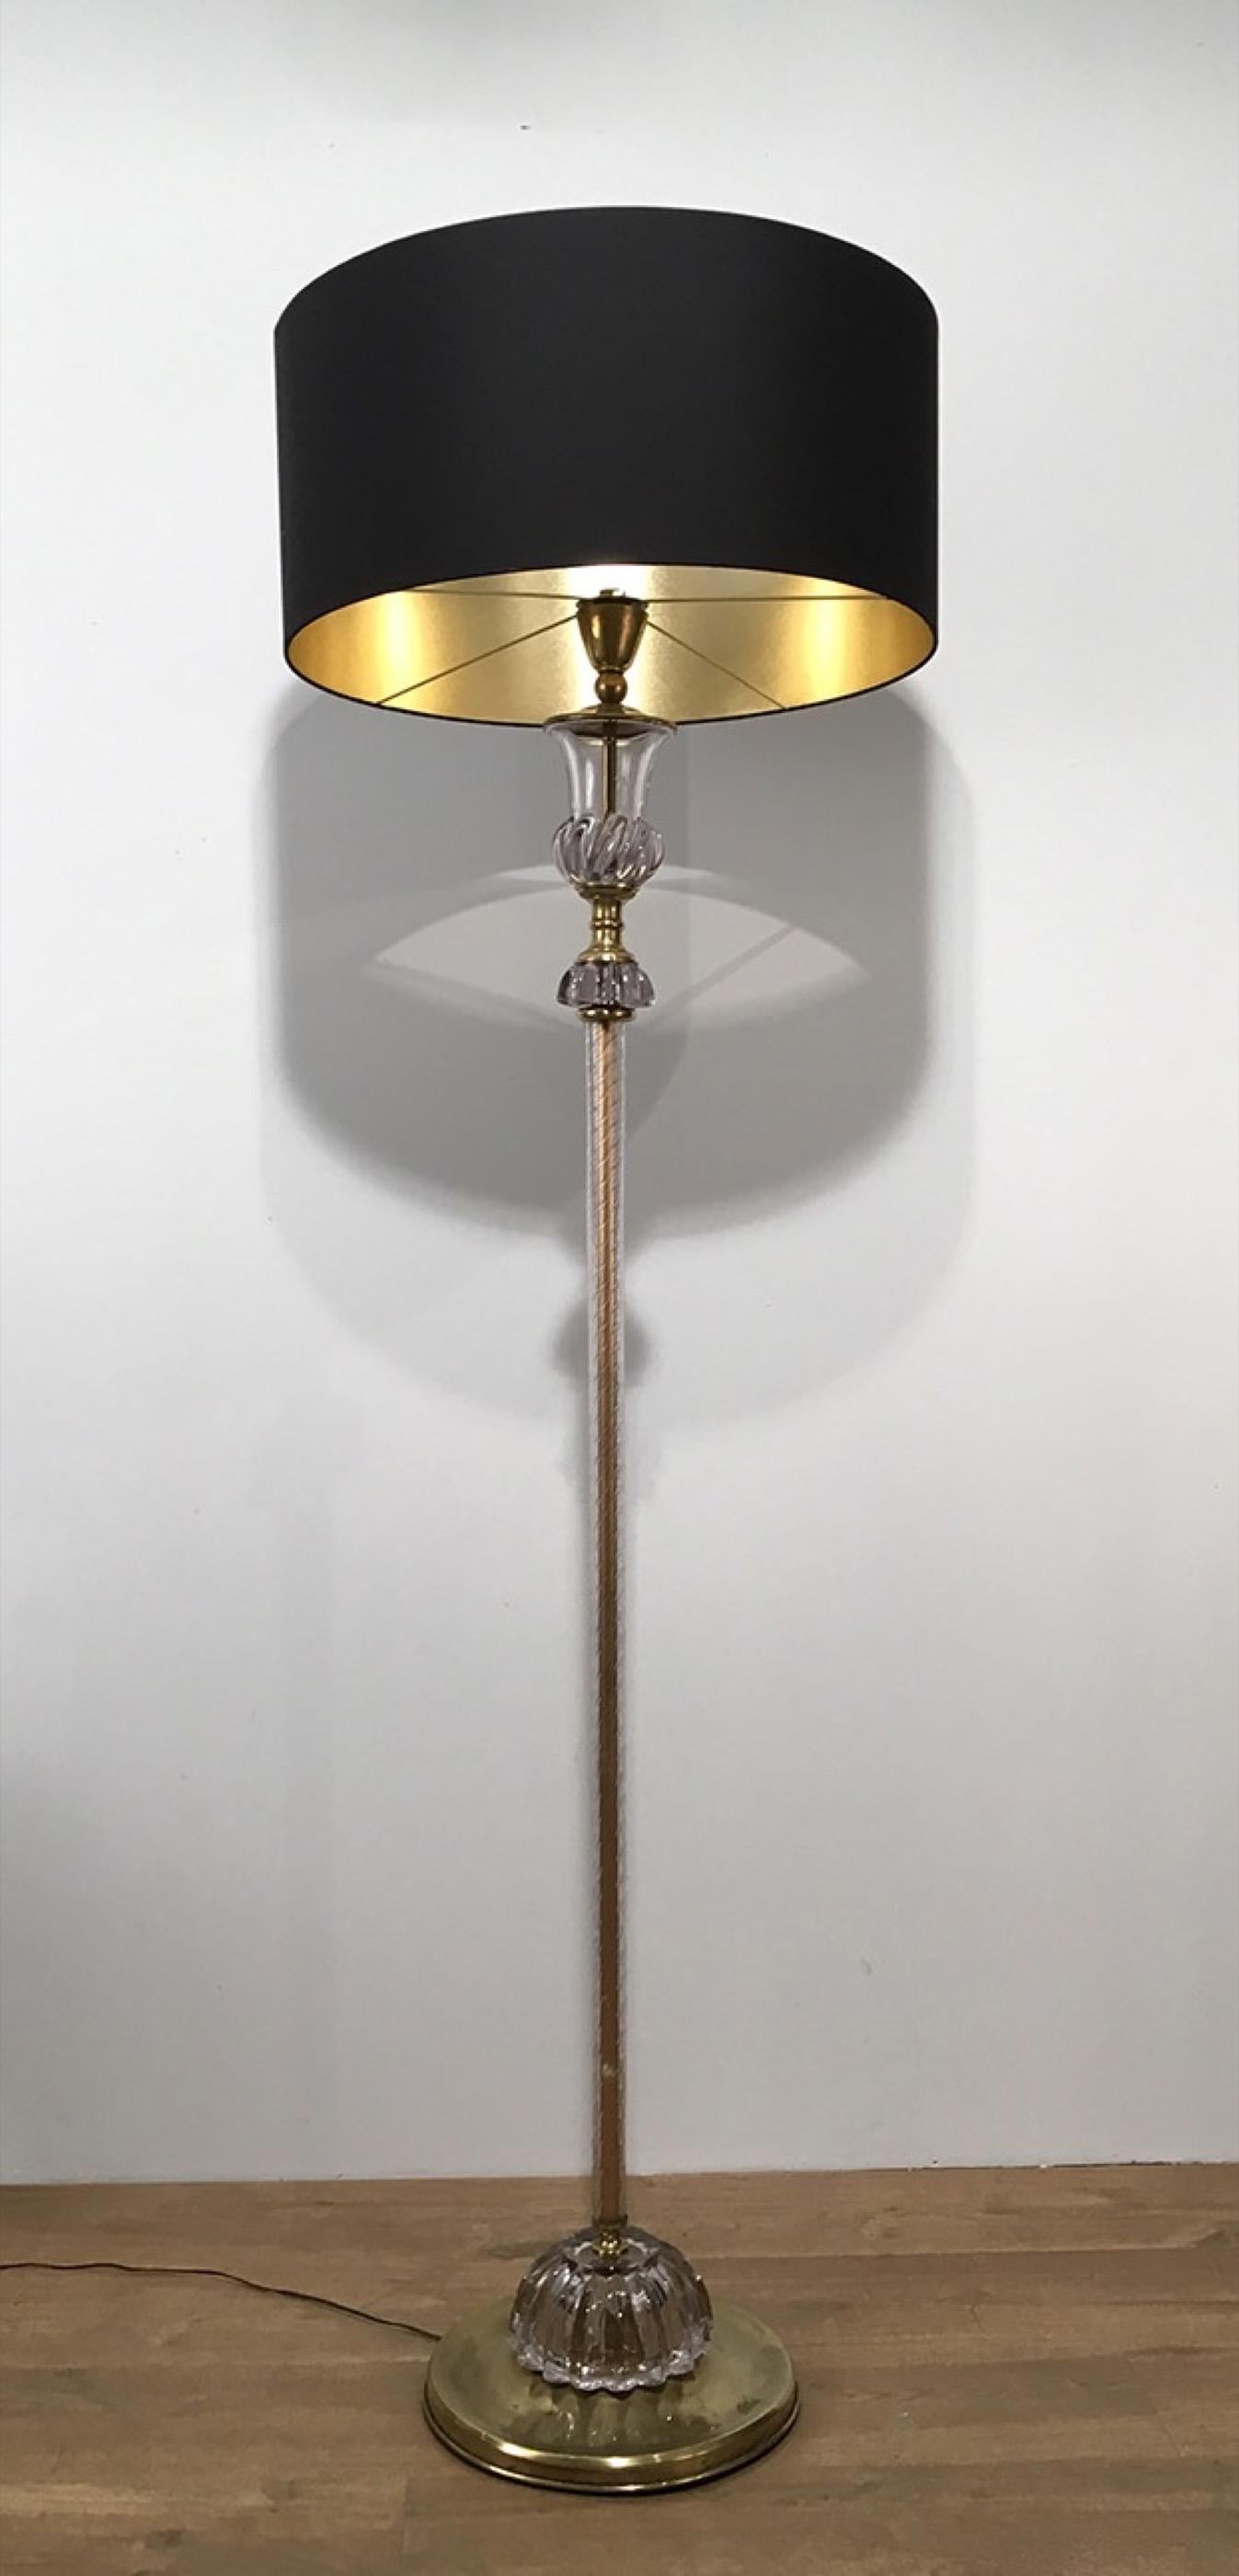 Mid-Century Modern Attributed to Barovier & Toso, Murano Glass Floor Lamp, circa 1940 For Sale